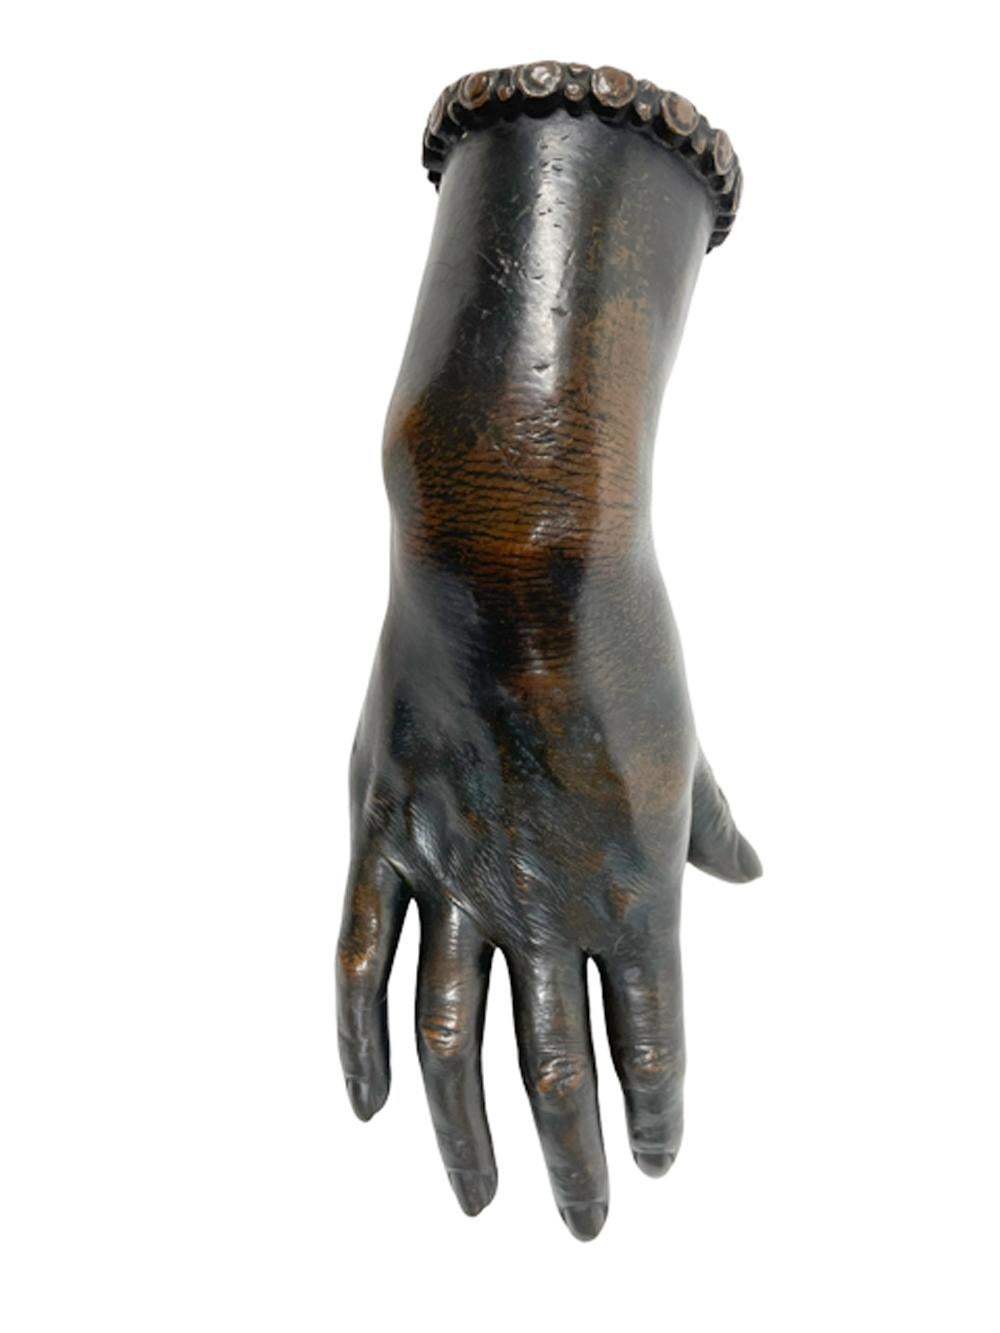 20th Century Art Deco Life-Size Patinated Cast Bronze Model of a Female Hand Dated 1926 For Sale